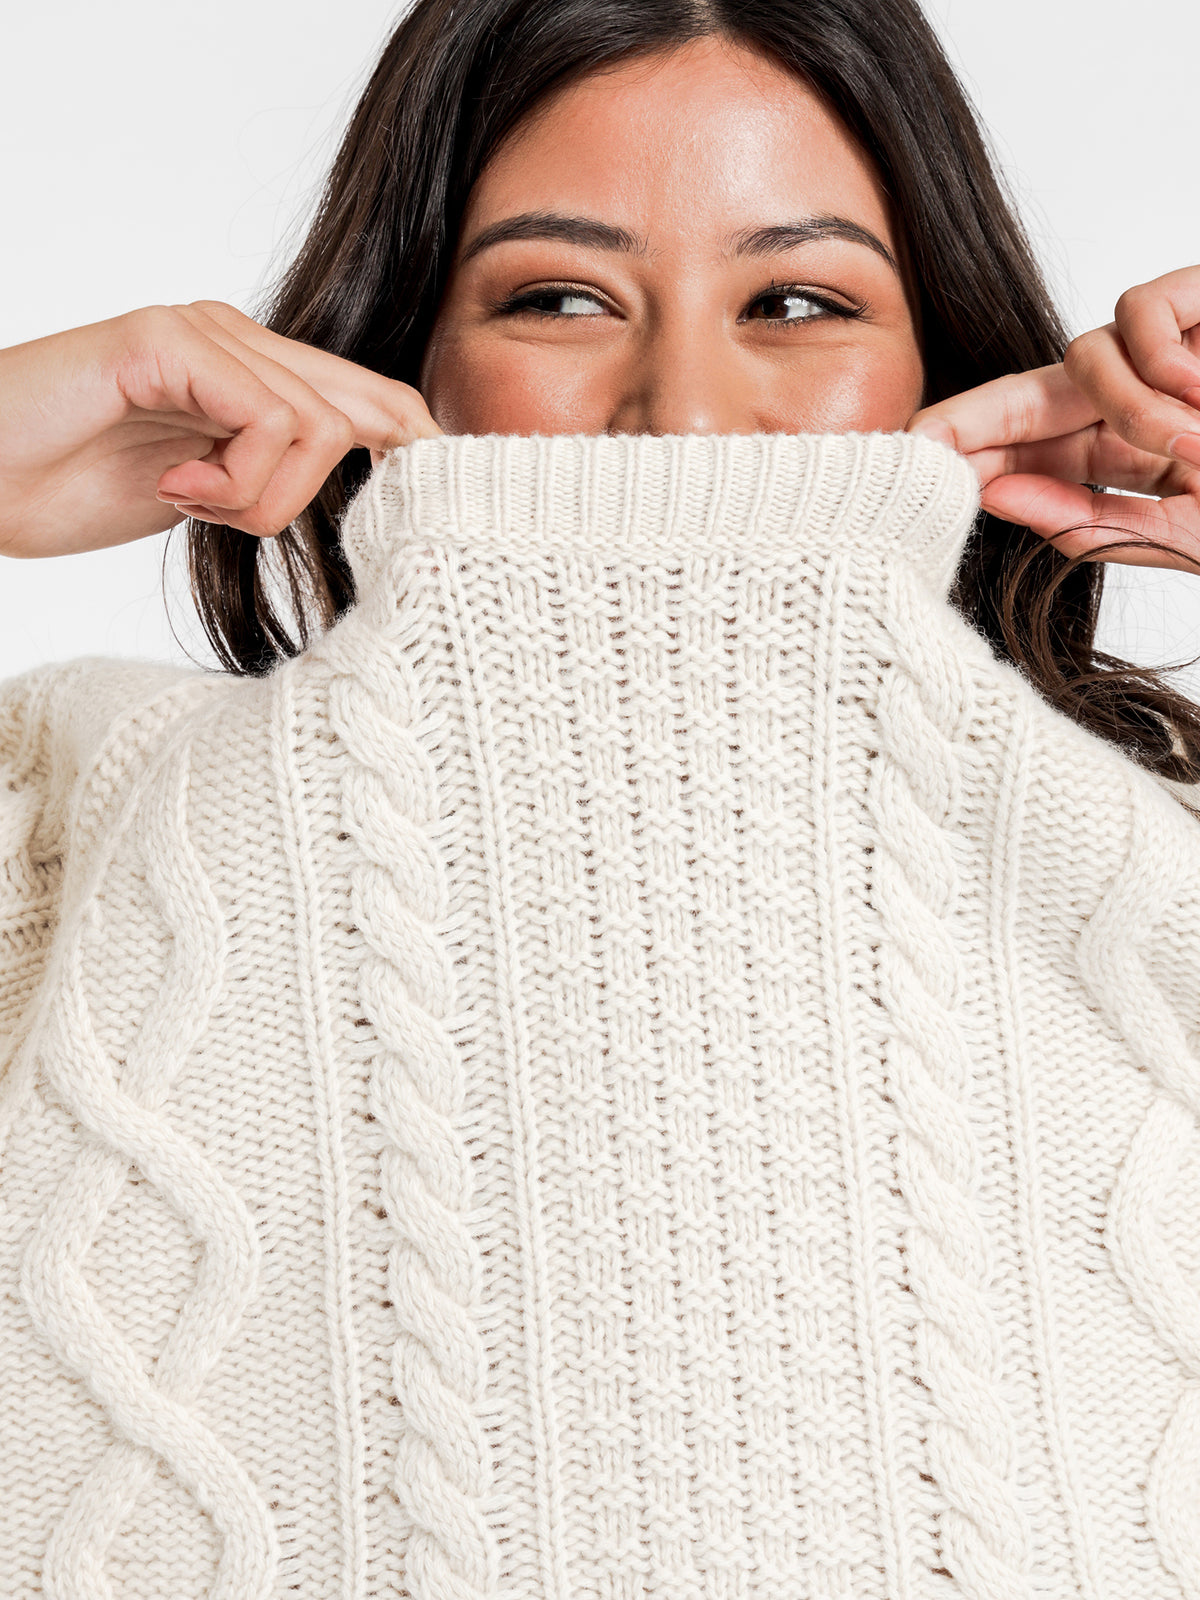 Jane Cabel Knit in White